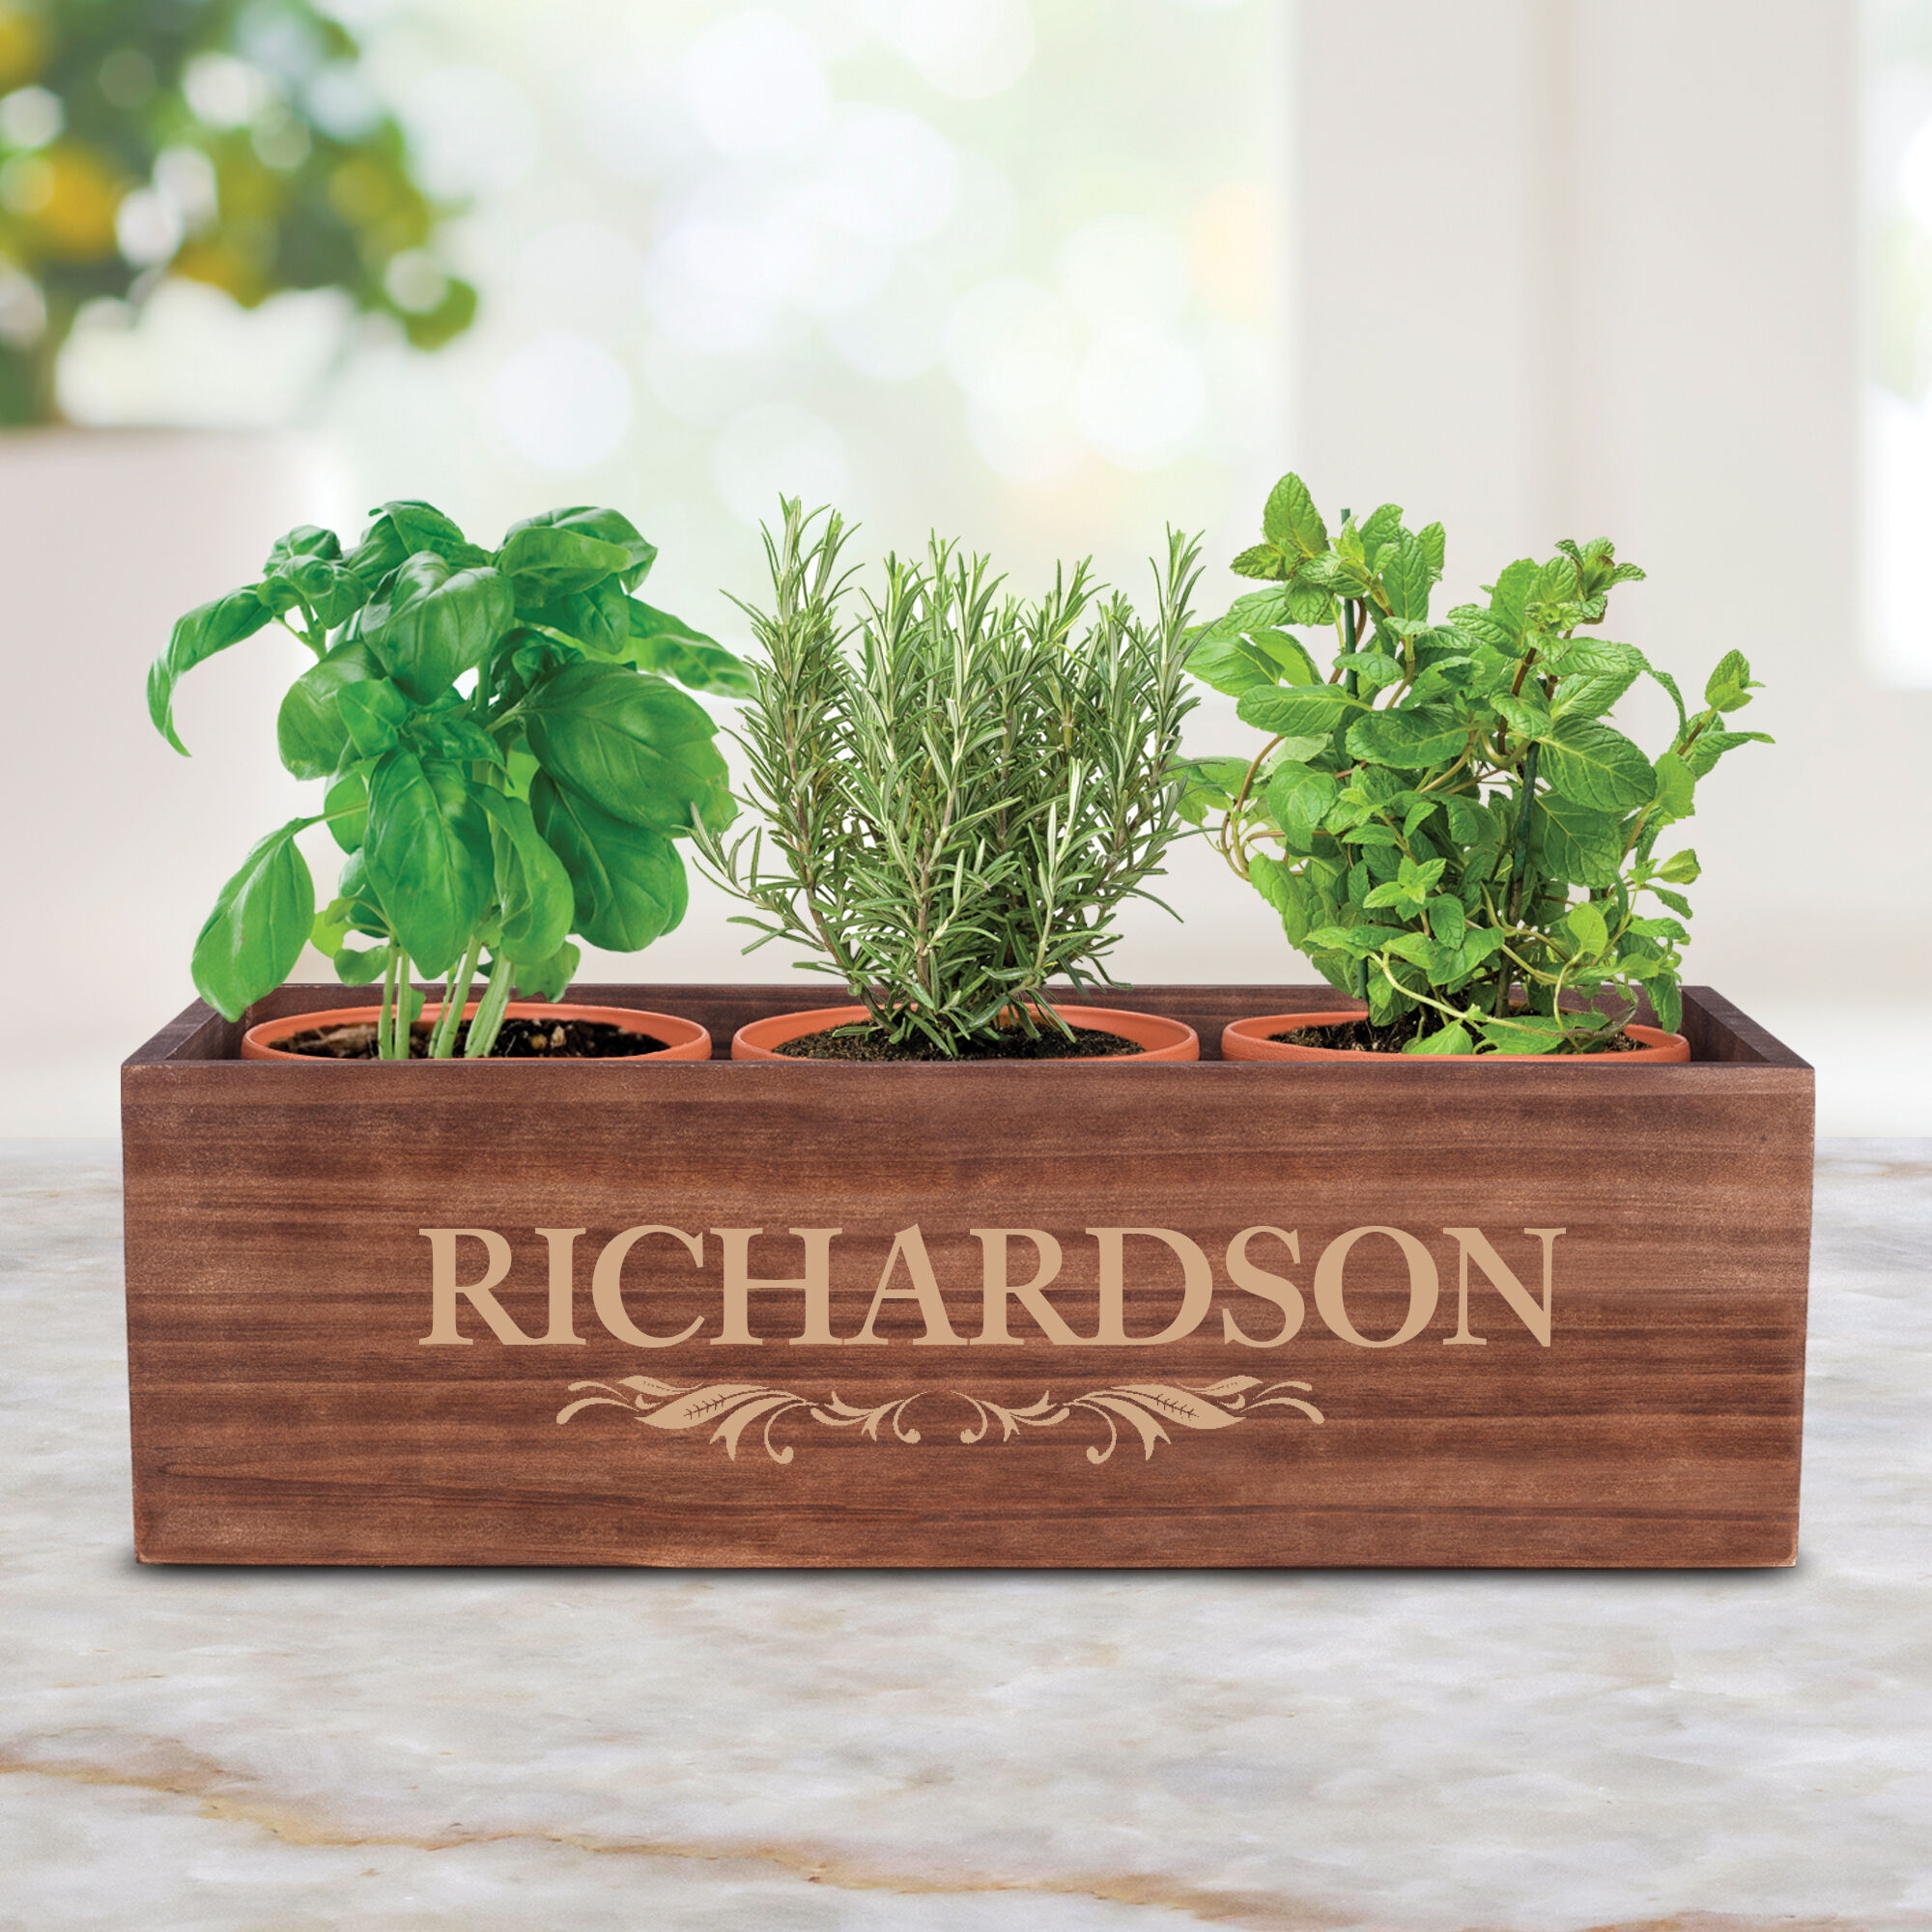 The Personalized Wood Planter Box 10878 0016 b back